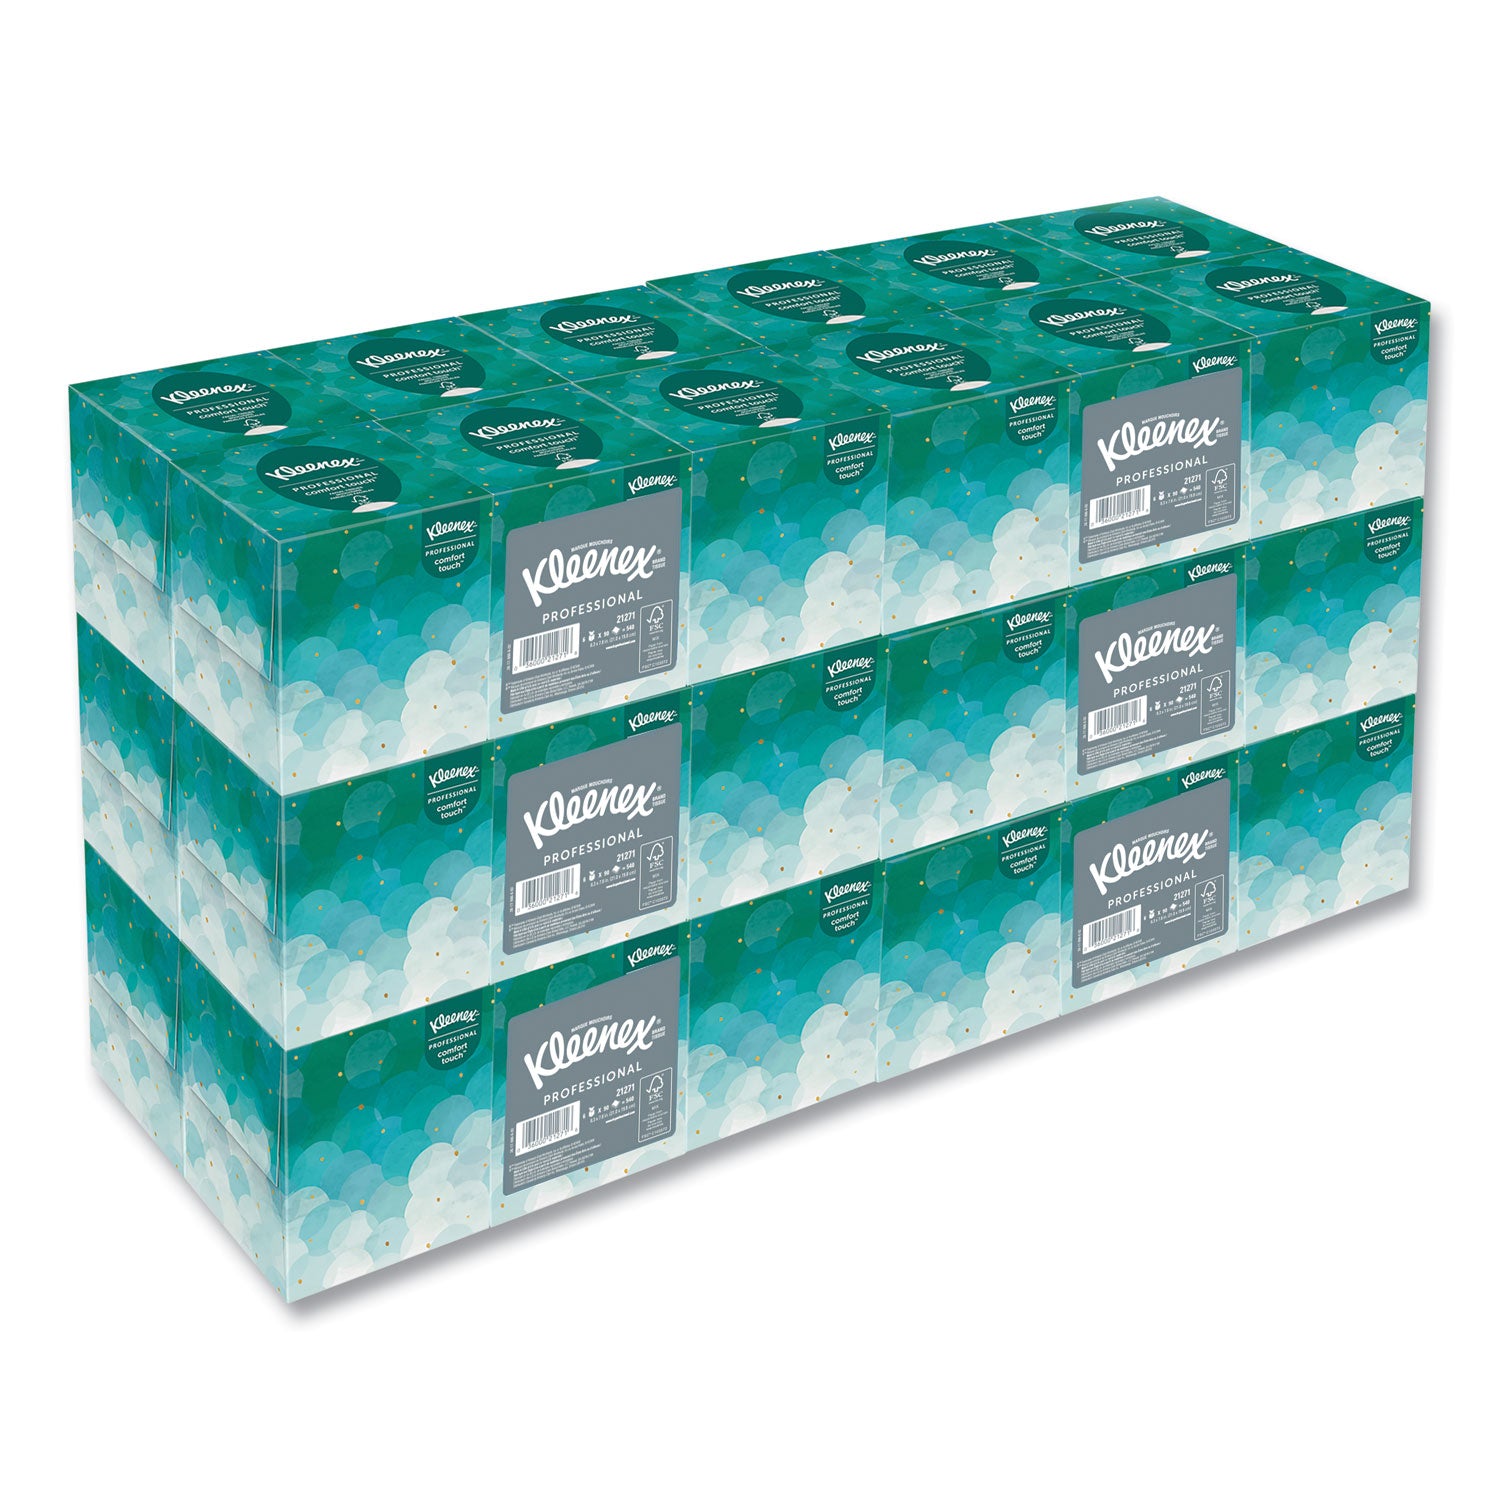 Boutique White Facial Tissue for Business, Pop-Up Box, 2-Ply, 95 Sheets/Box, 6 Boxes/Pack, 6 Packs/Carton - 